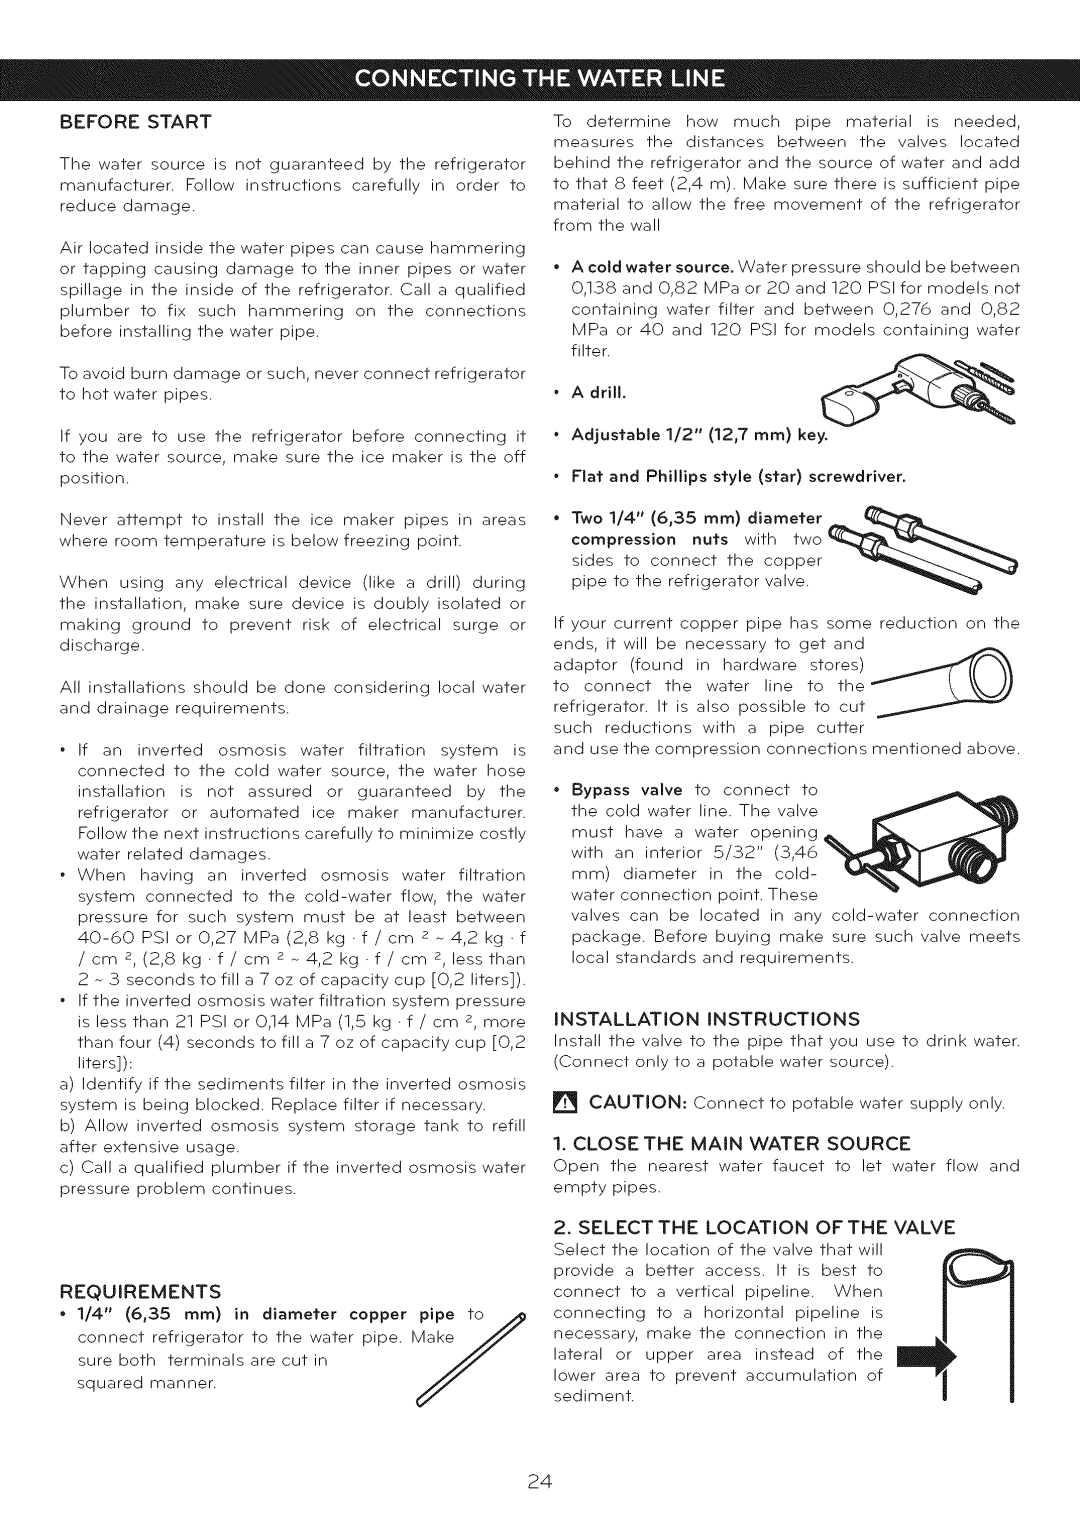 LG Electronics LFC25765 manual Installation Instructions, Close The Main Water Source, in diameter 